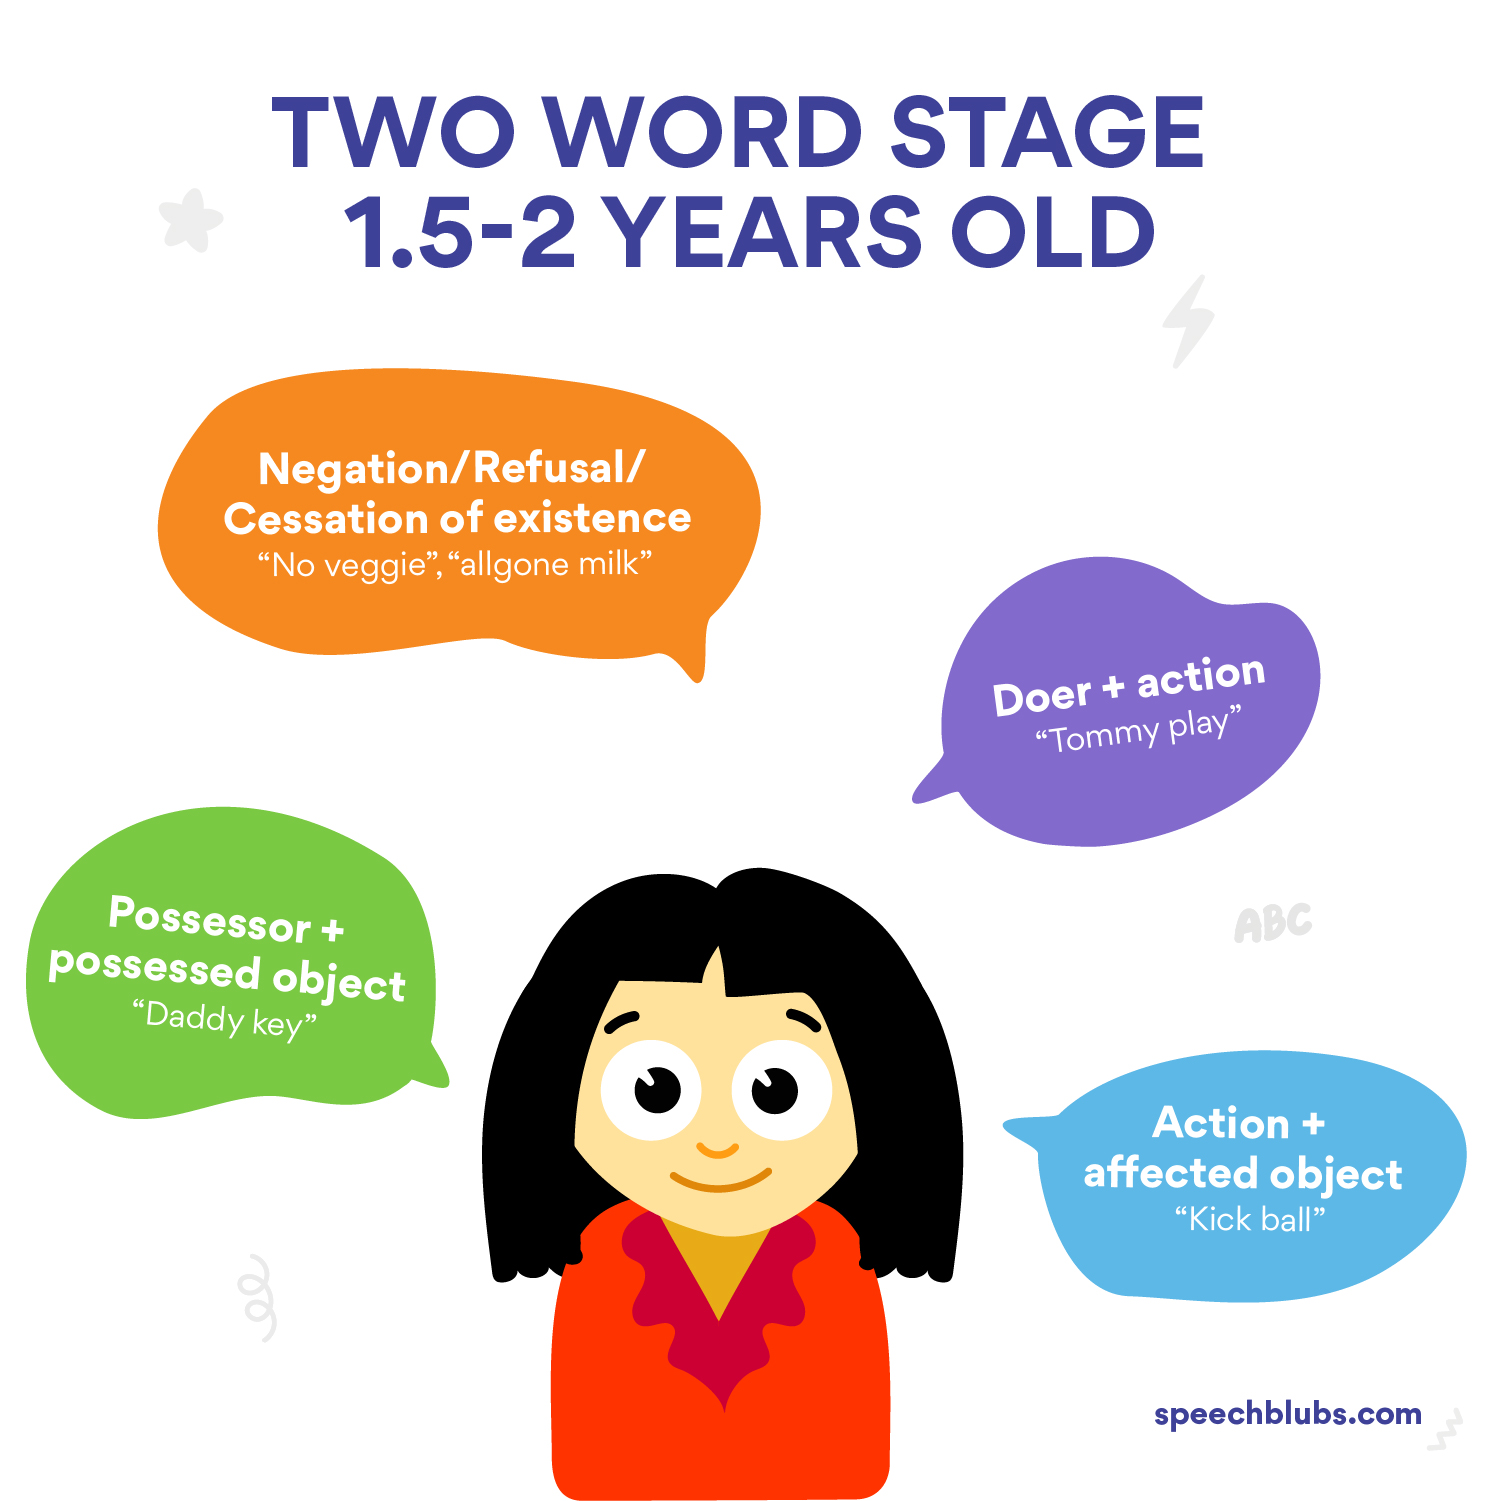 telegraphic speech vs two word stage